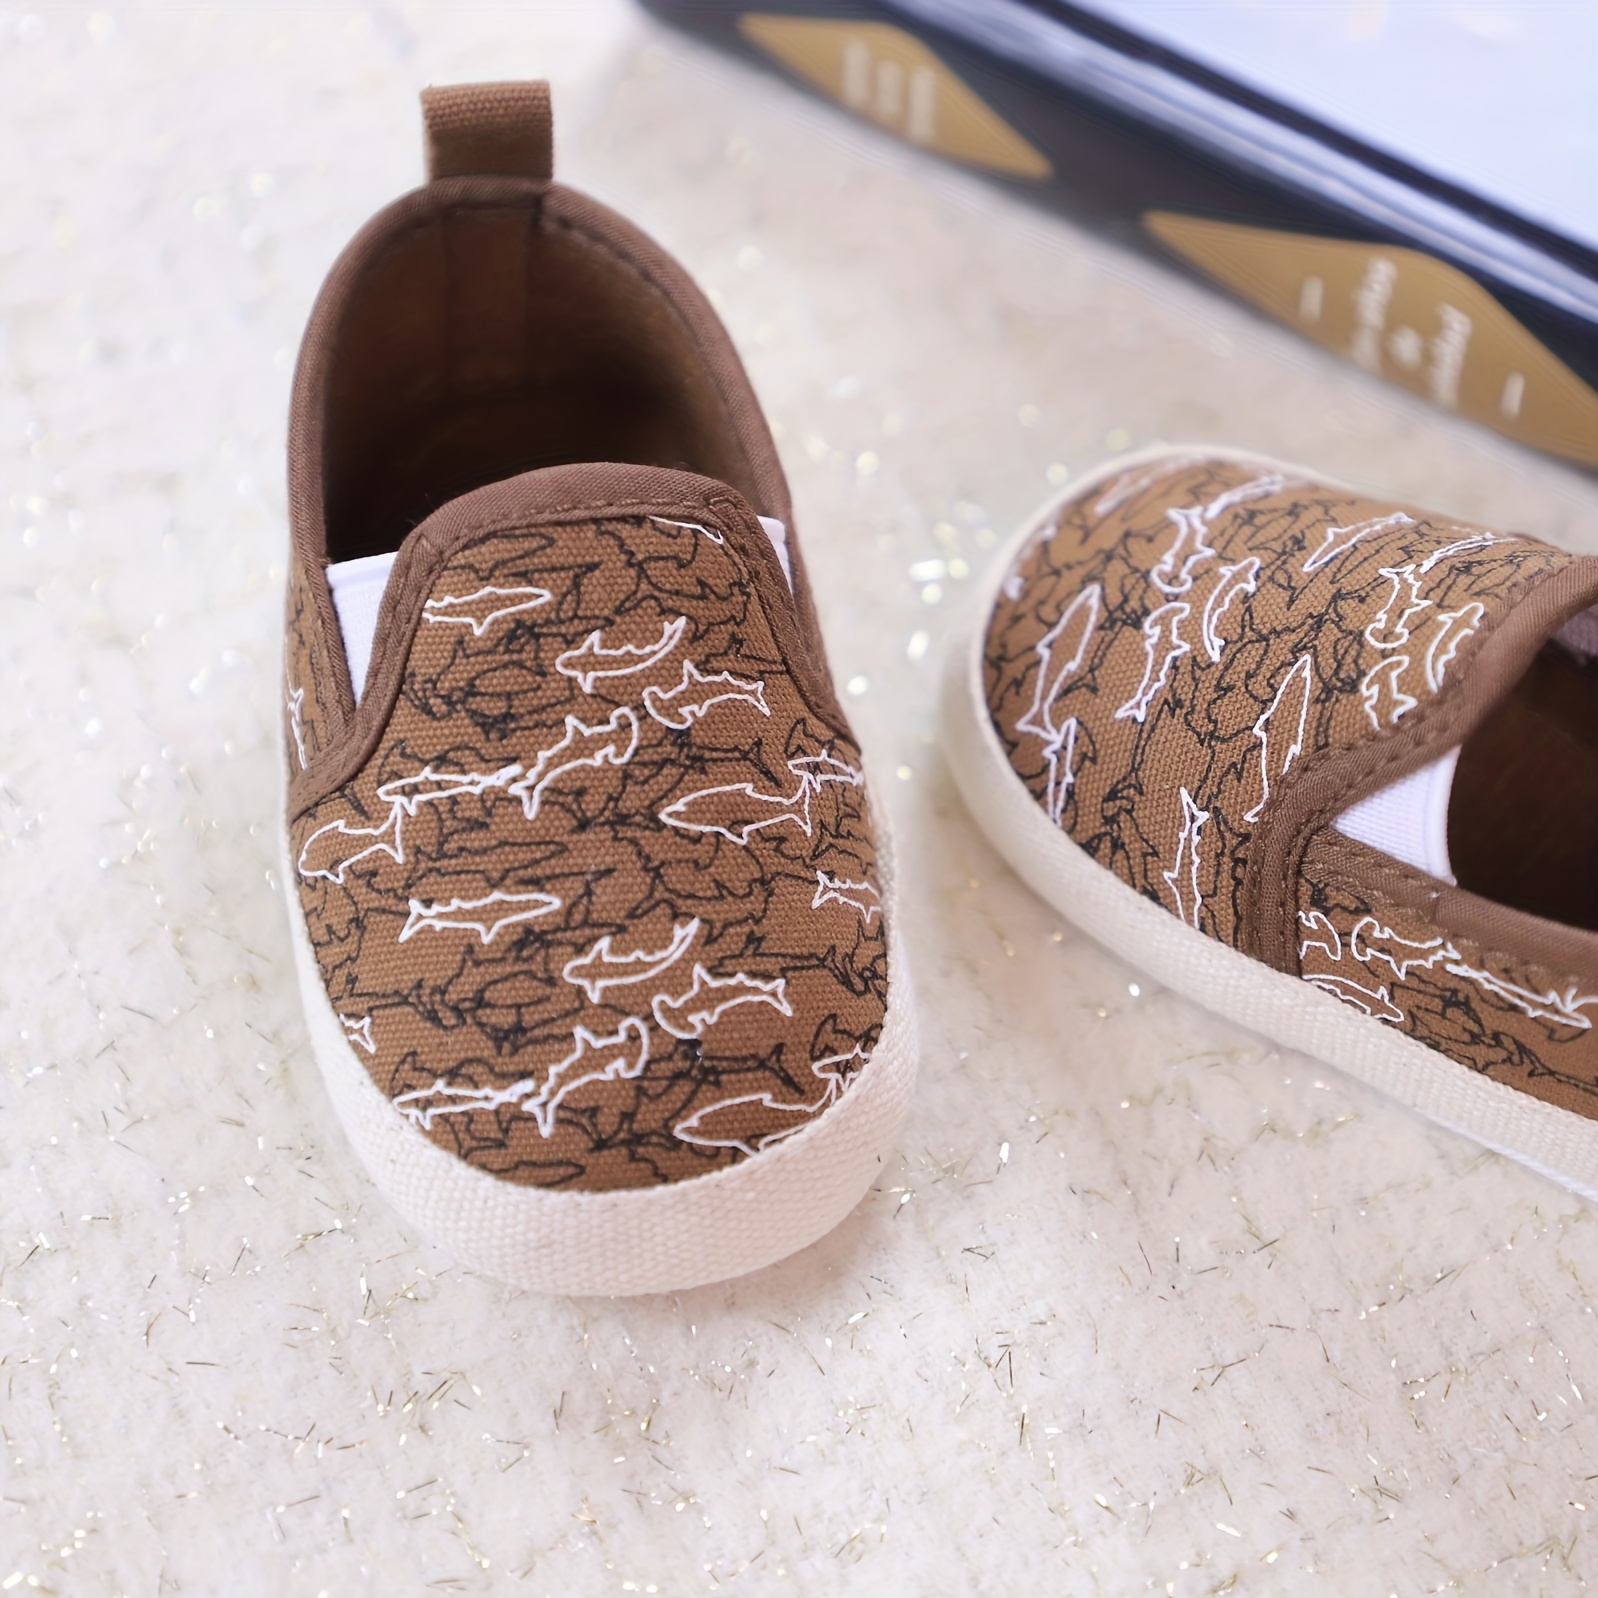 Casual Cute Cartoon Slip On Low Top Loafer Shoes For Baby Boys